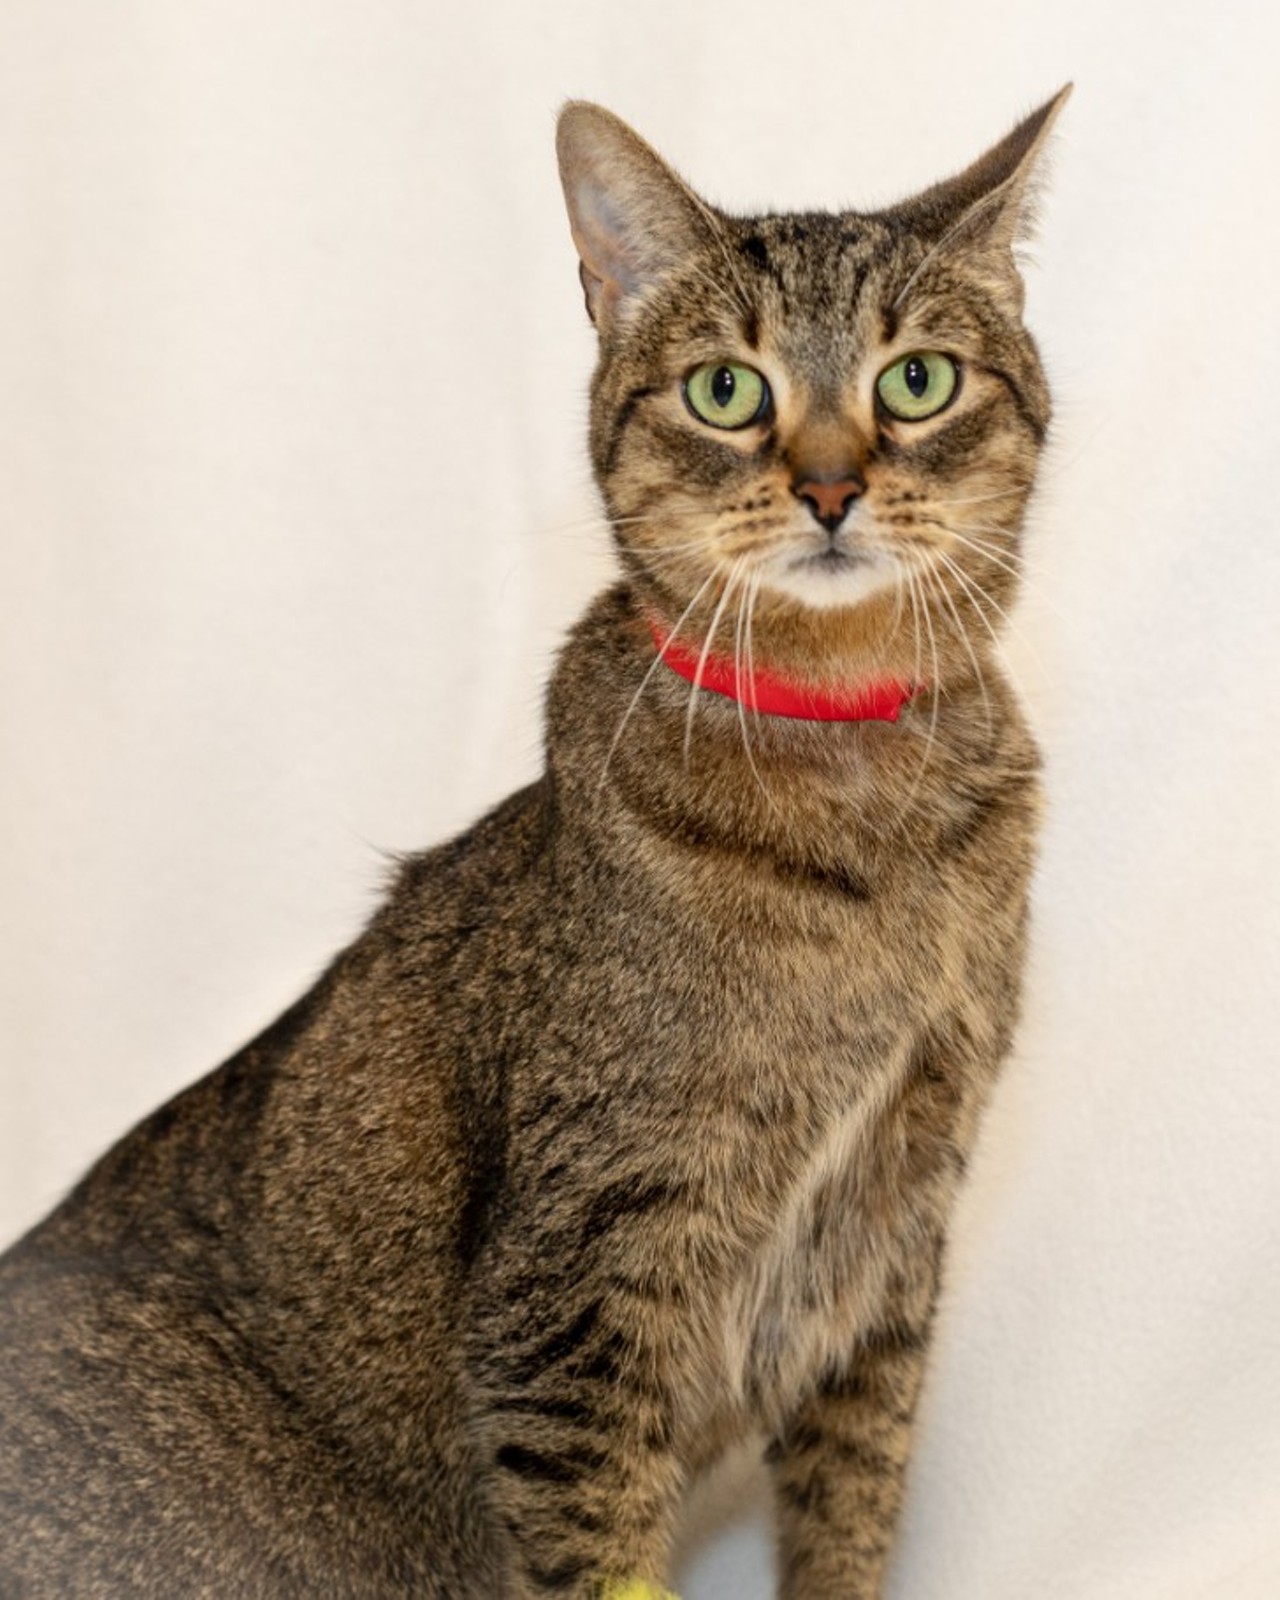 NAME: Pickles
GENDER: Female
BREED: Domestic Short Hair
AGE: 8 years, 1 month
WEIGHT: 10 pounds
SPECIAL CONSIDERATIONS: Pickles prefers a home with older or no children and no other cats.
REASON I CAME TO MHS: Owner surrender
LOCATION: PetSmart of Roseville
ID NUMBER: 871631